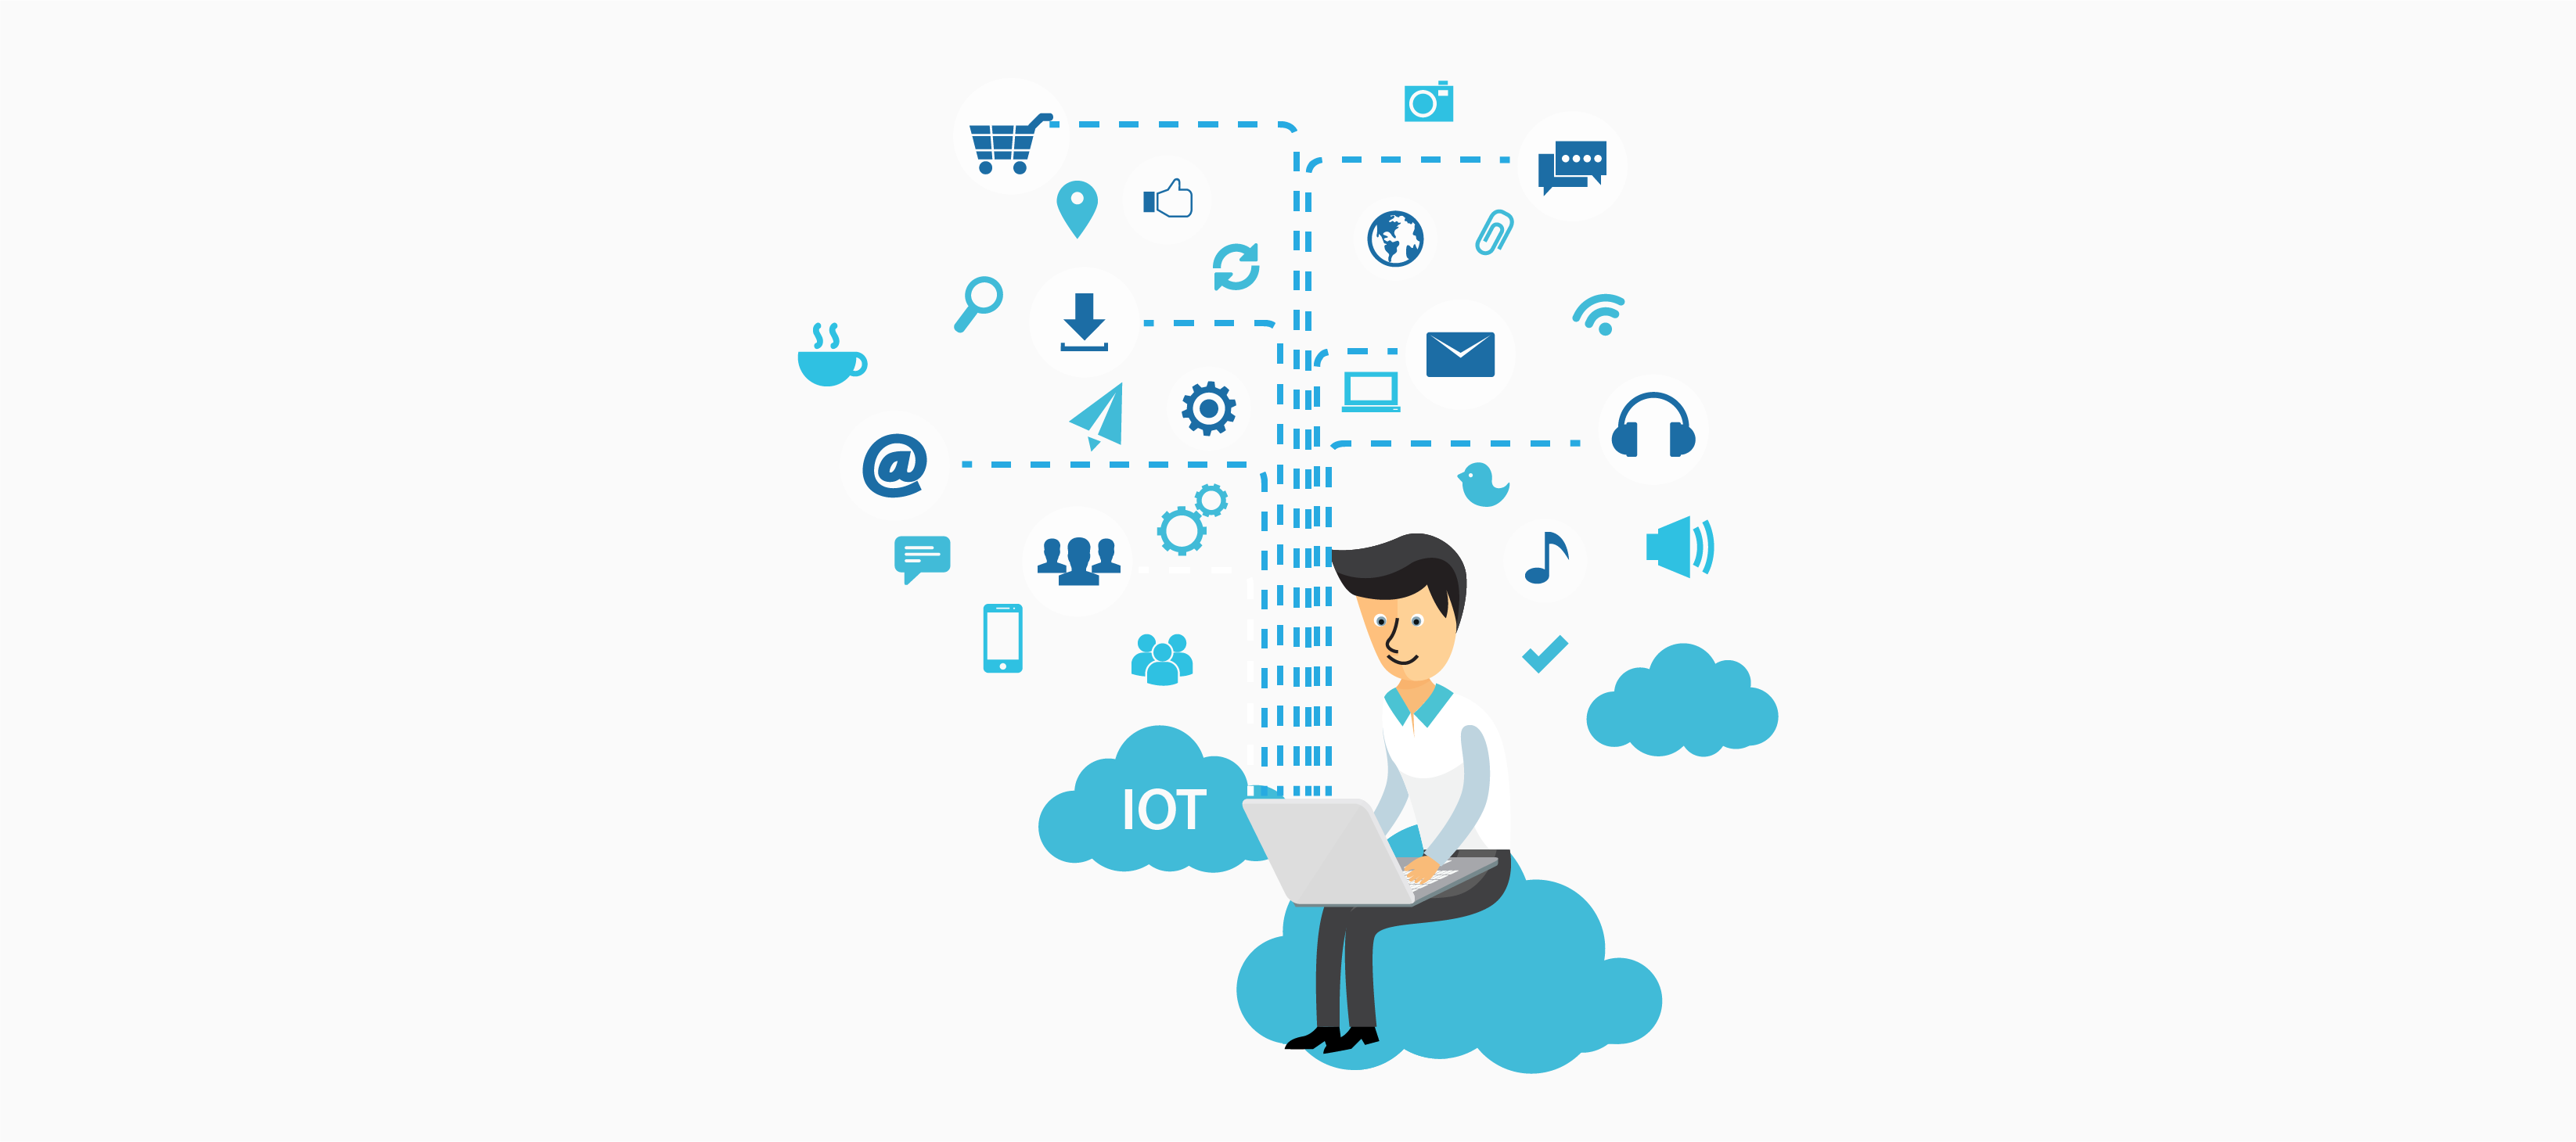 Fundamental aspect while selecting the top IoT companies